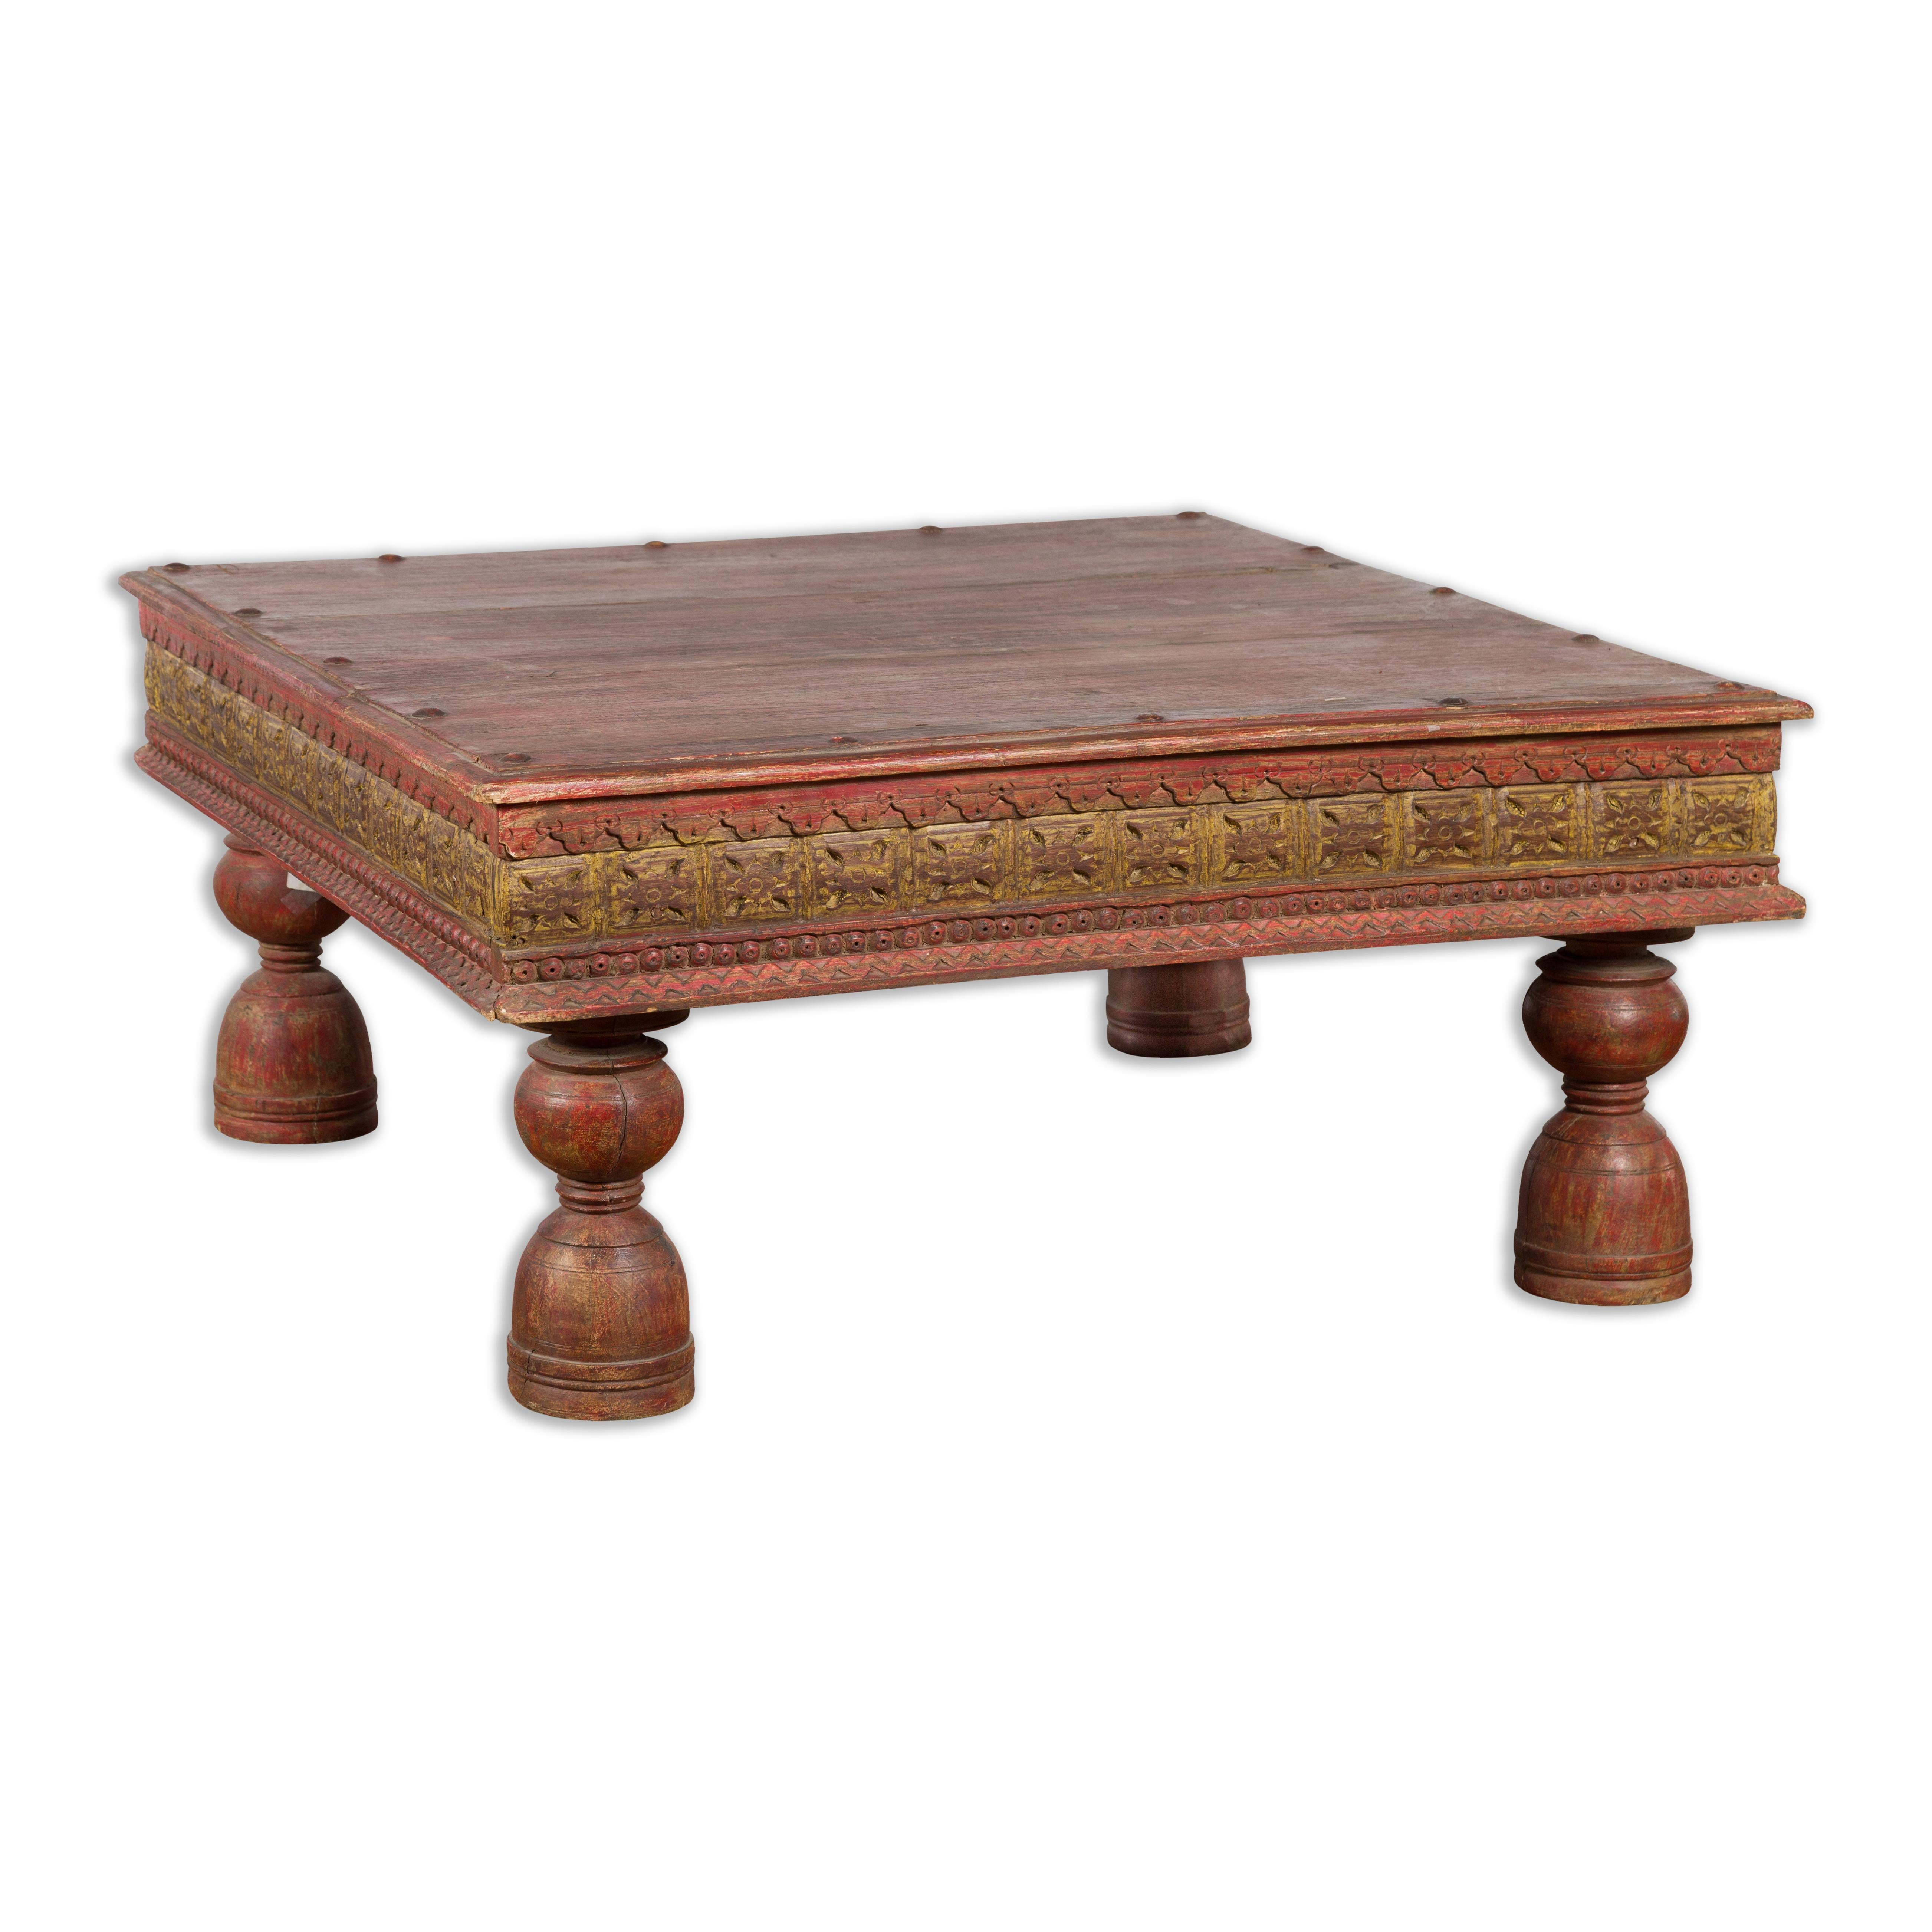 Indian Primitive Low Carved Wooden Coffee Table with Polychrome Accents For Sale 5